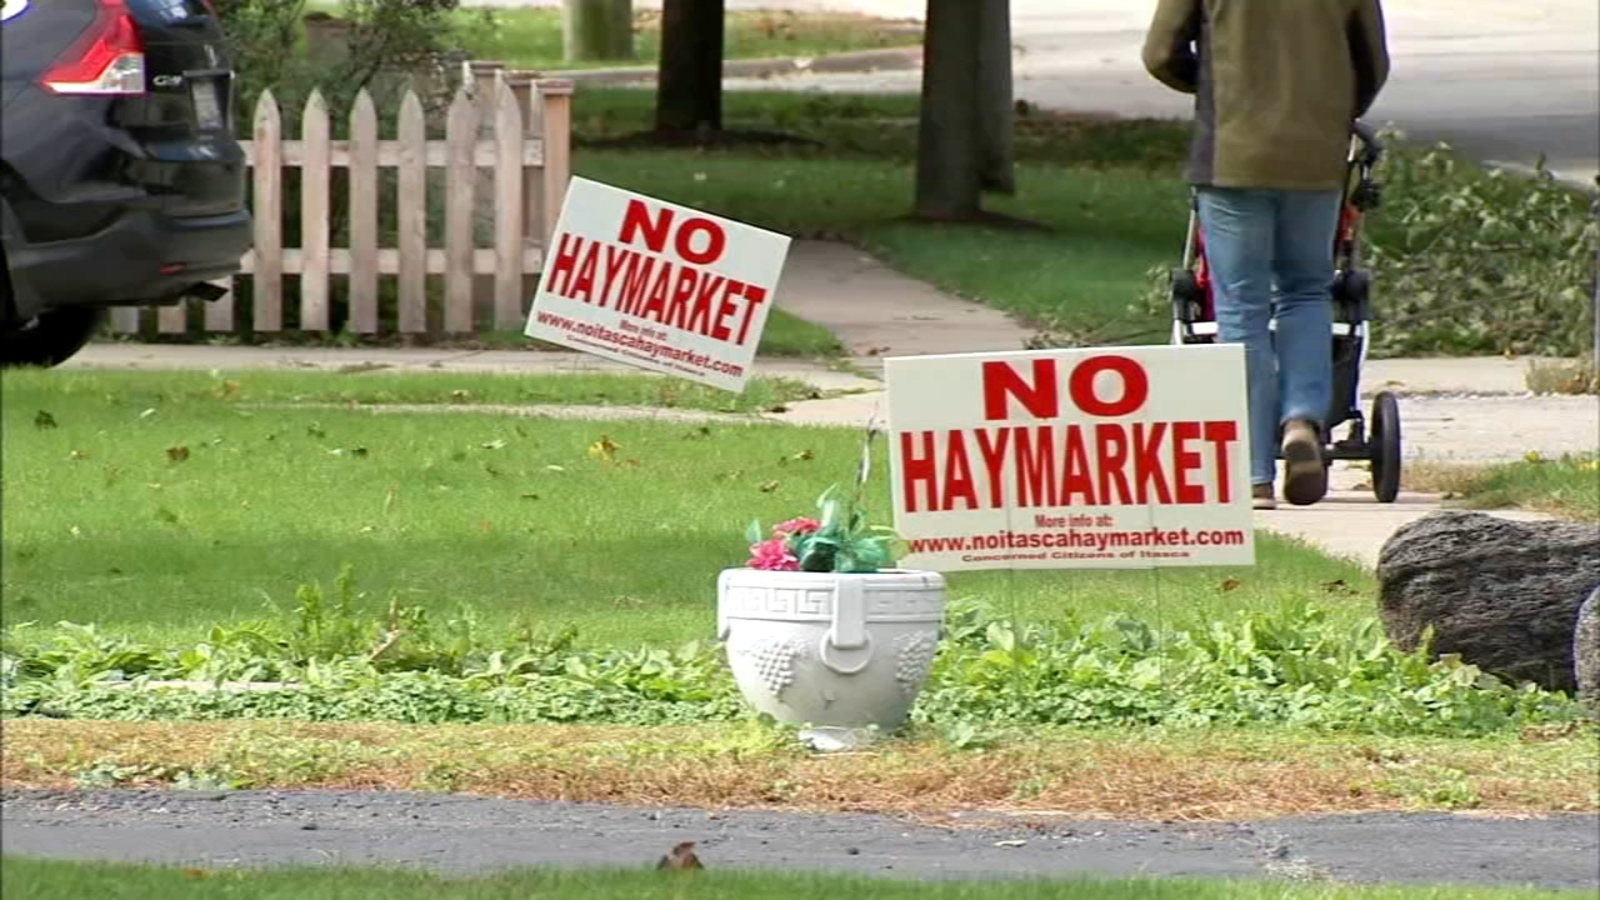 Itasca Haymarket Center rehab facility meeting in Roselle expected to draw thousands